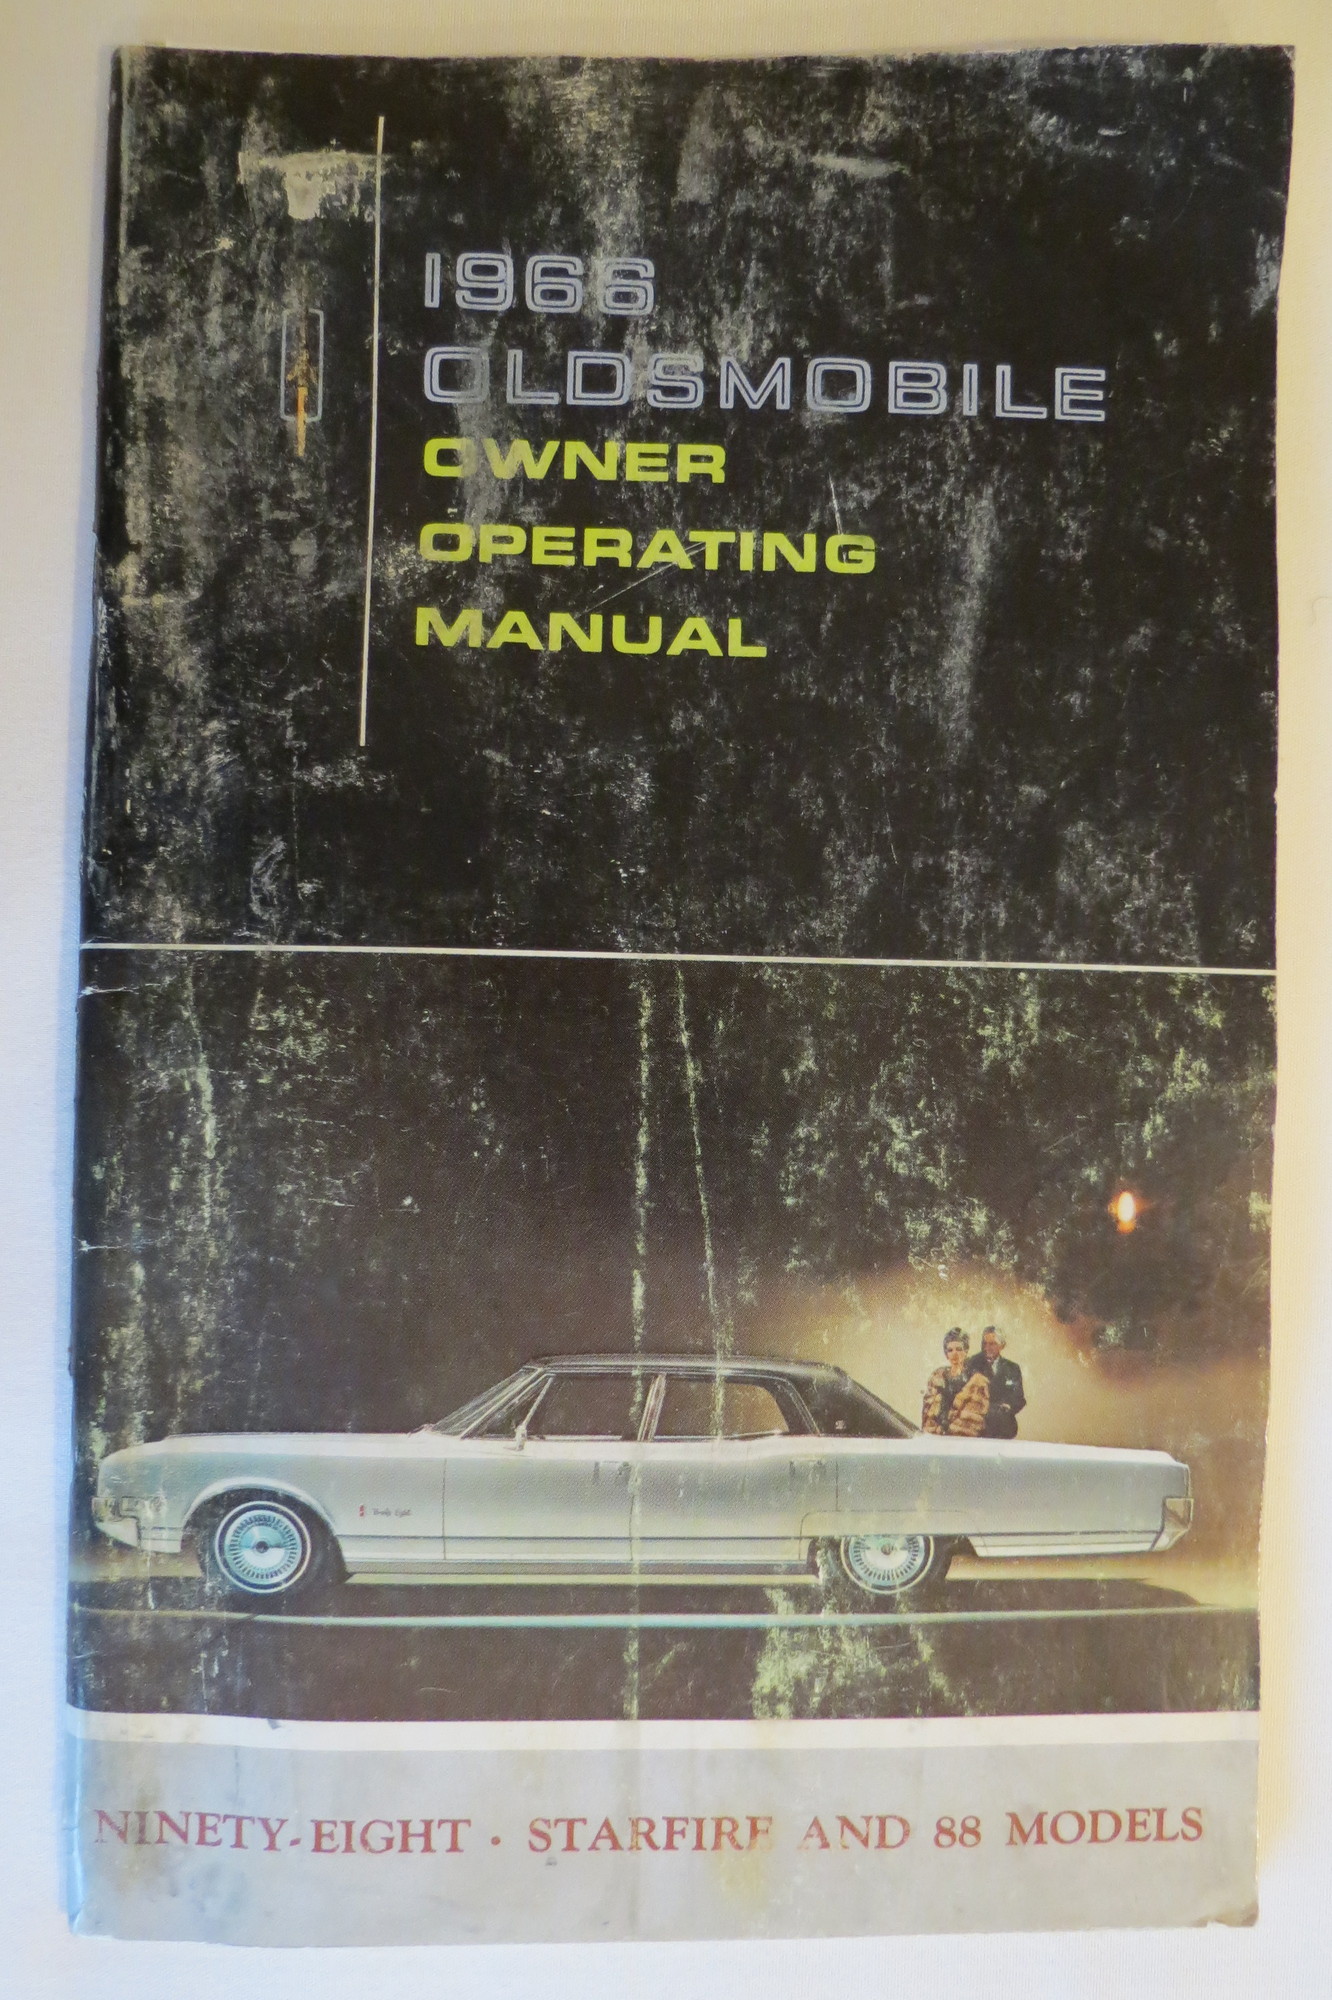 Image for 1966 OLDSMOBILE OWNER OPERATING MANUAL Ninety-Eight, Starfire and 88 Models